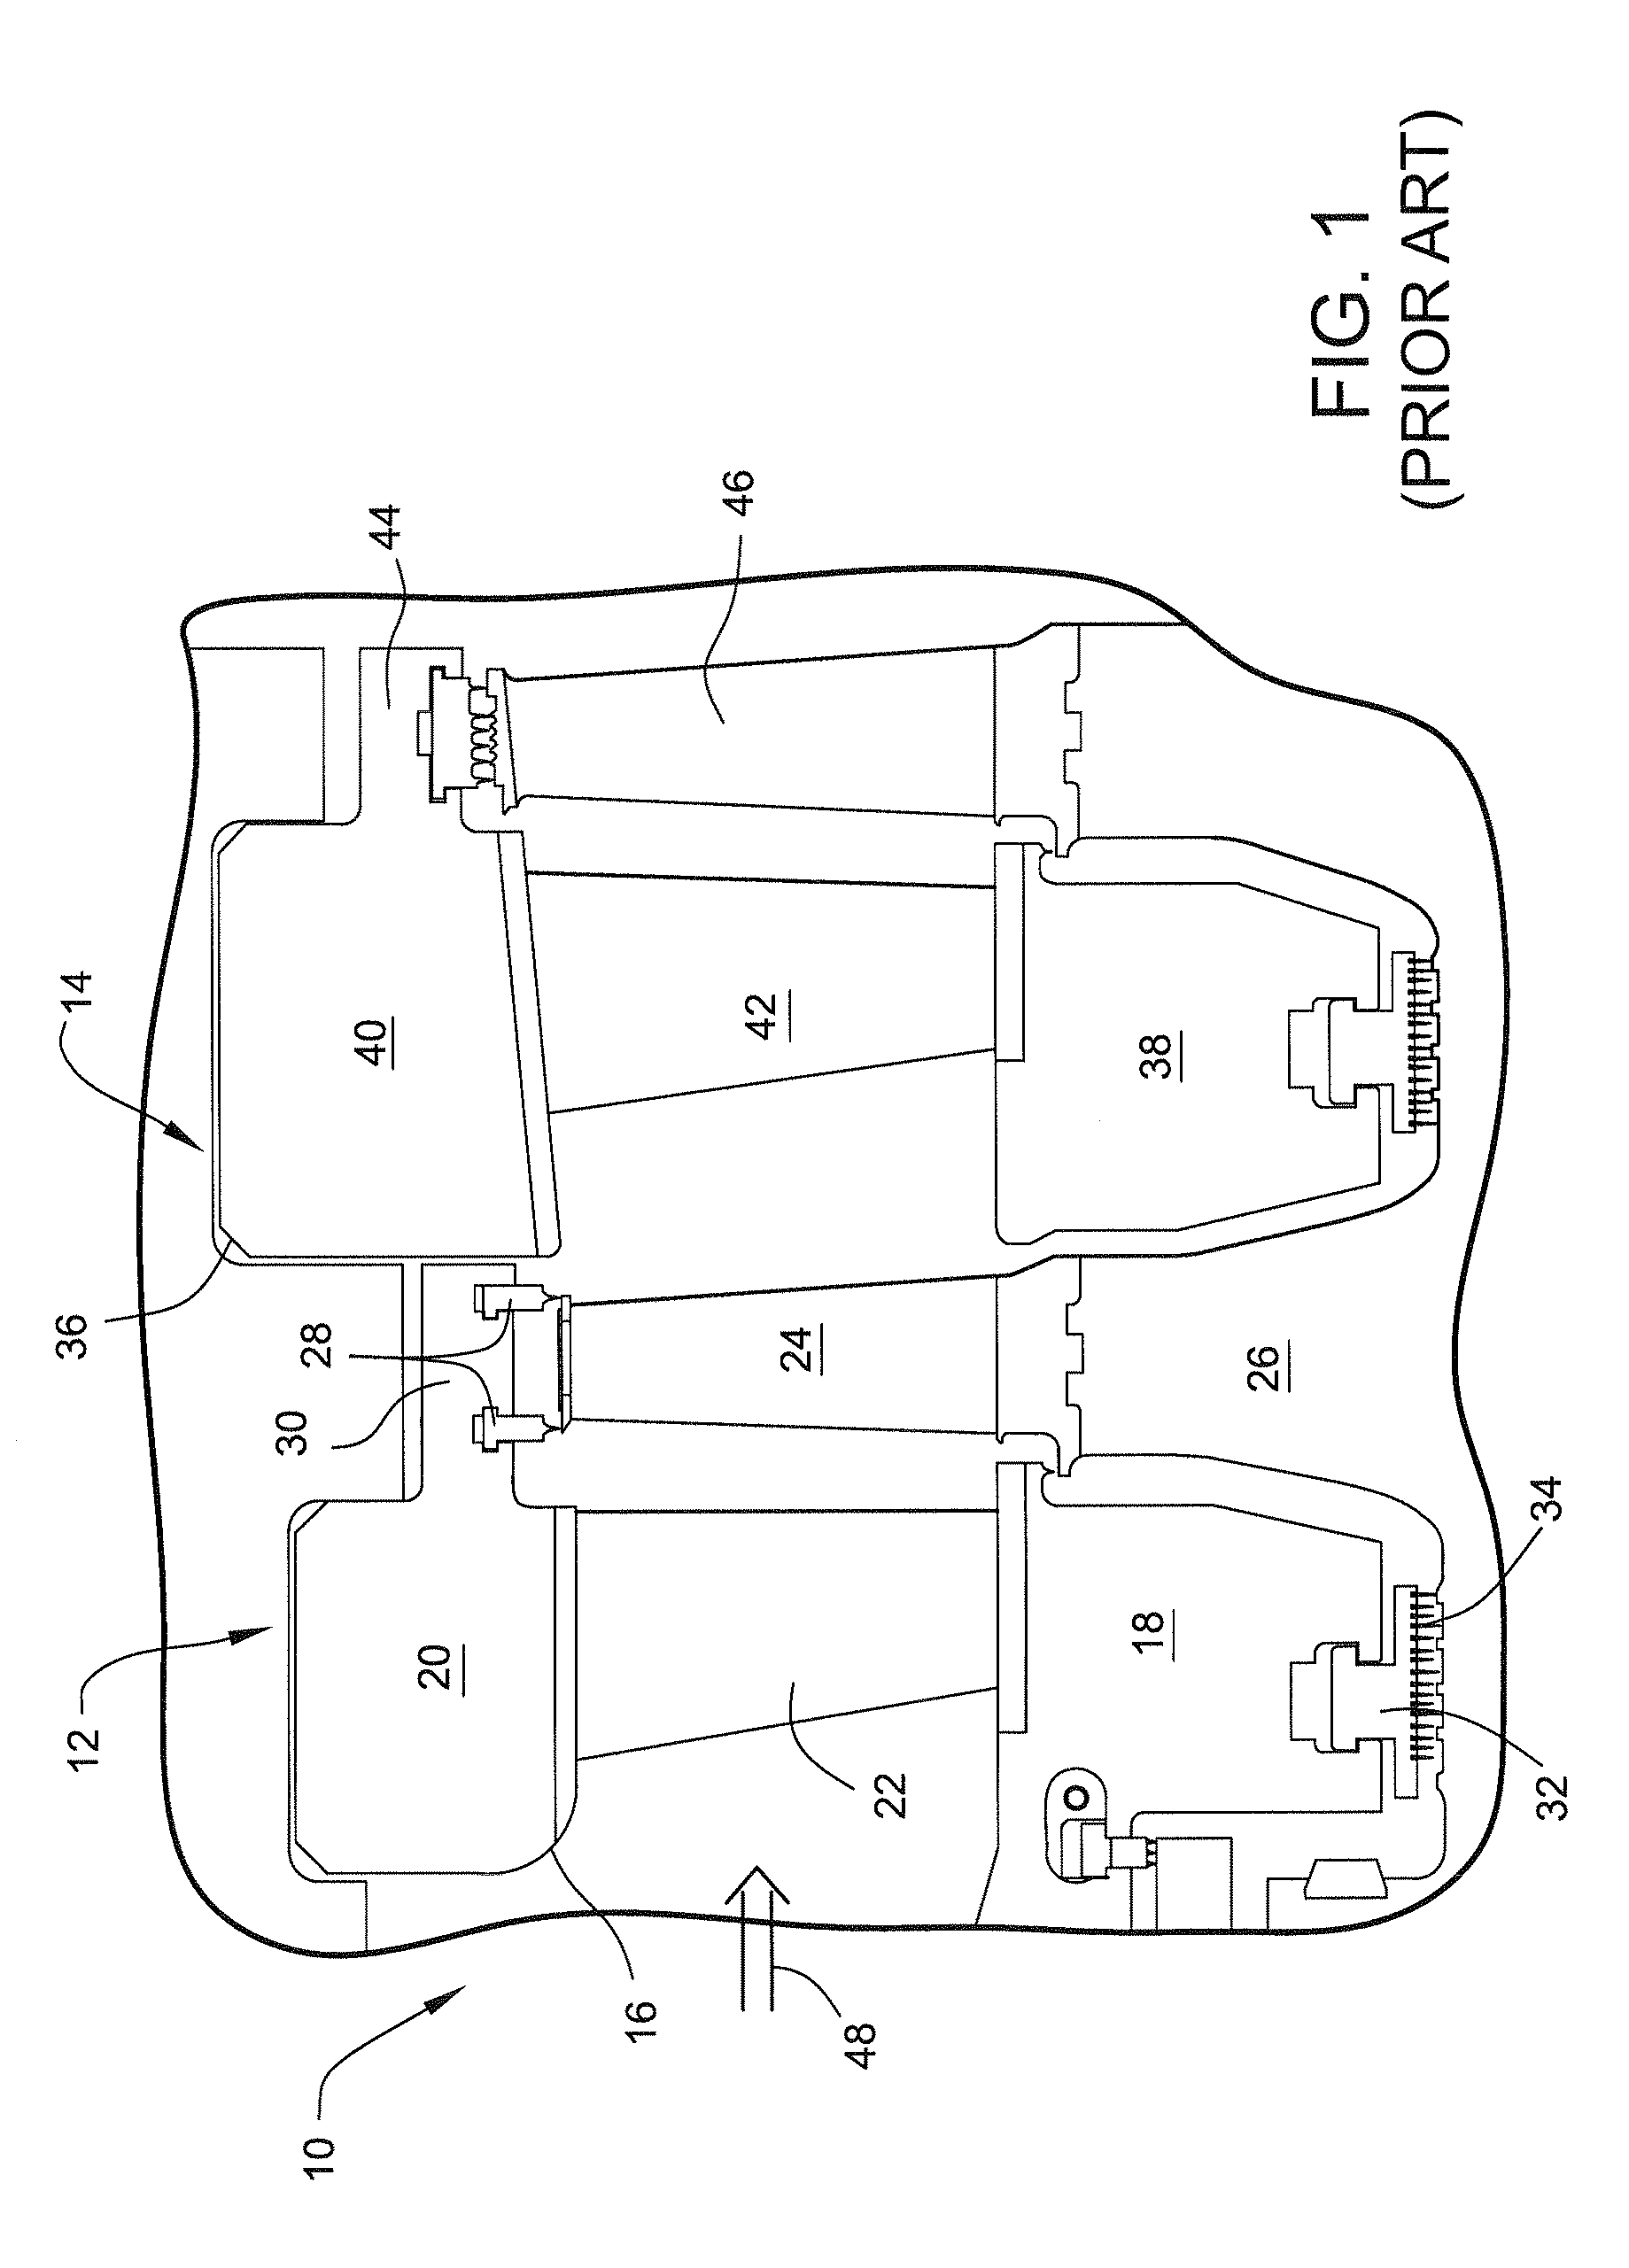 Apparatus for minimizing solid particle erosion in steam turbines